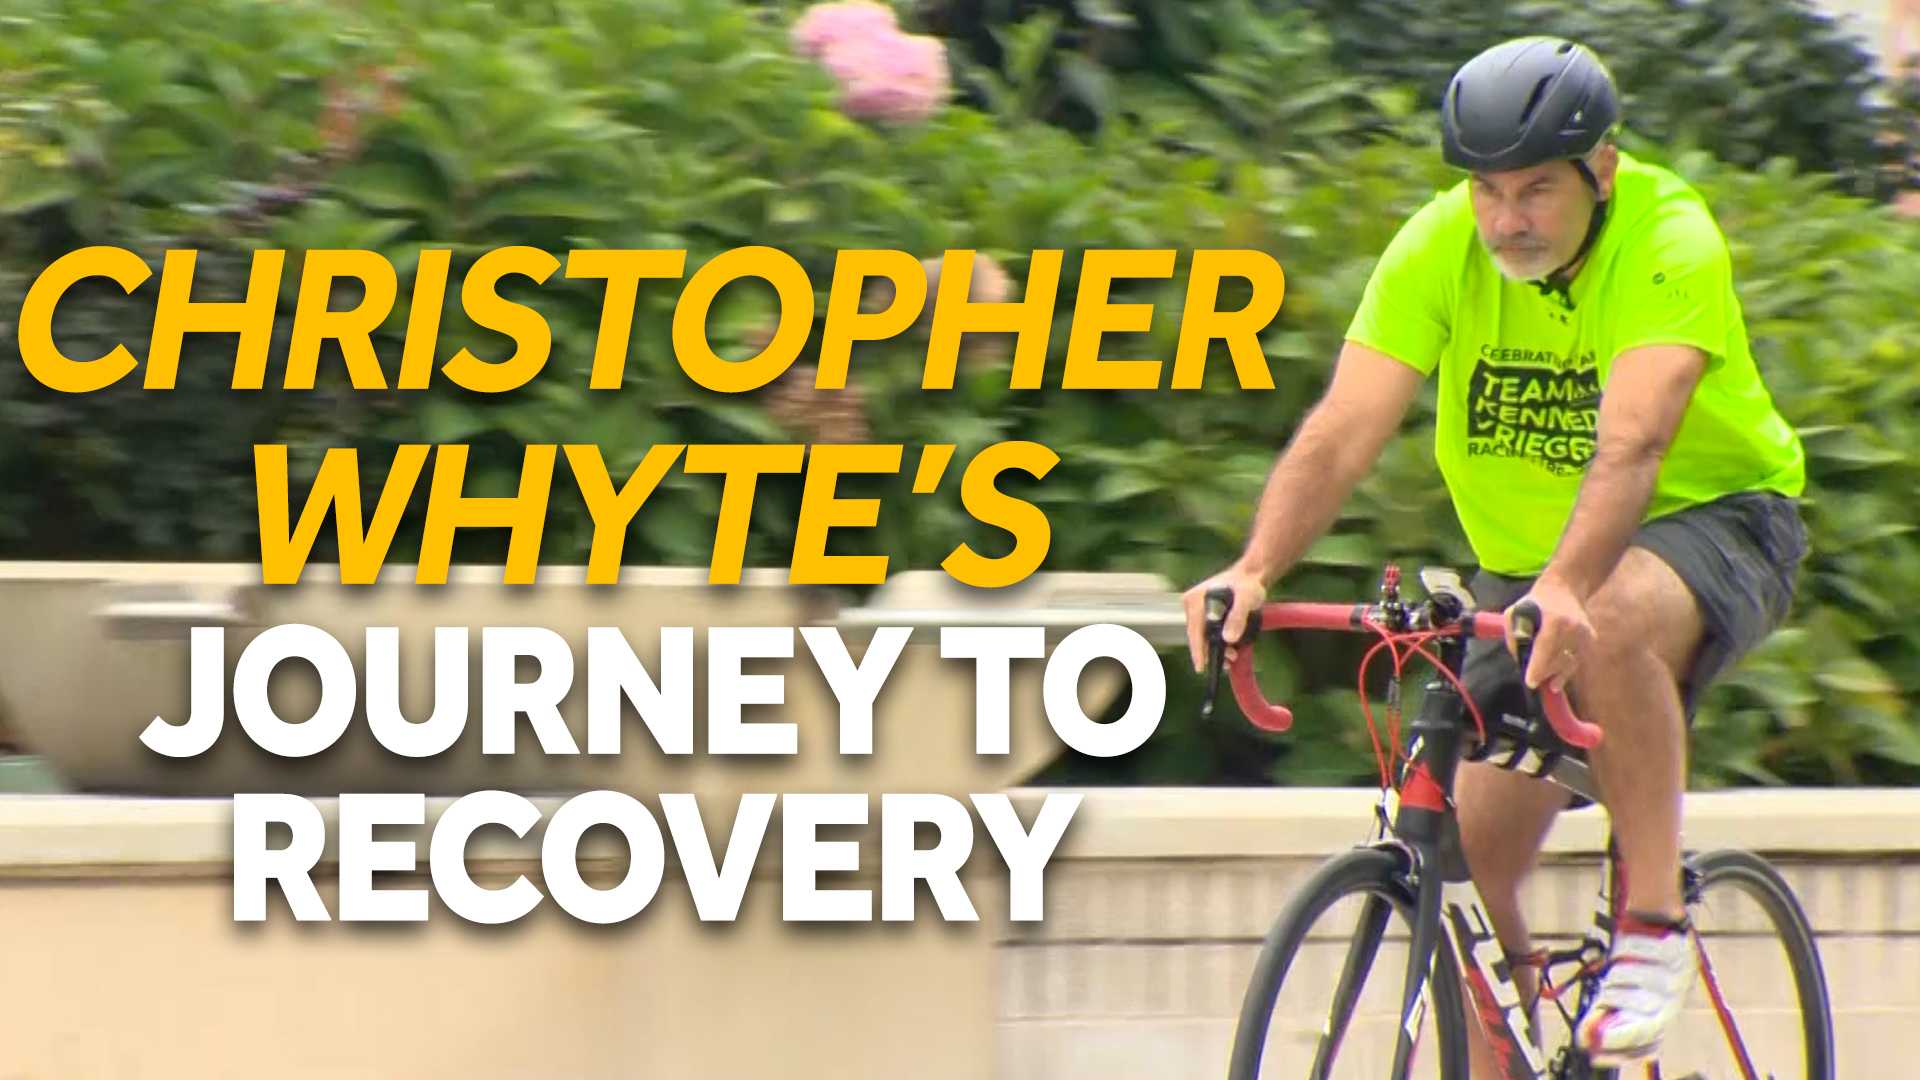 Man paralyzed in triathlon accident returns to racing after years of rehab